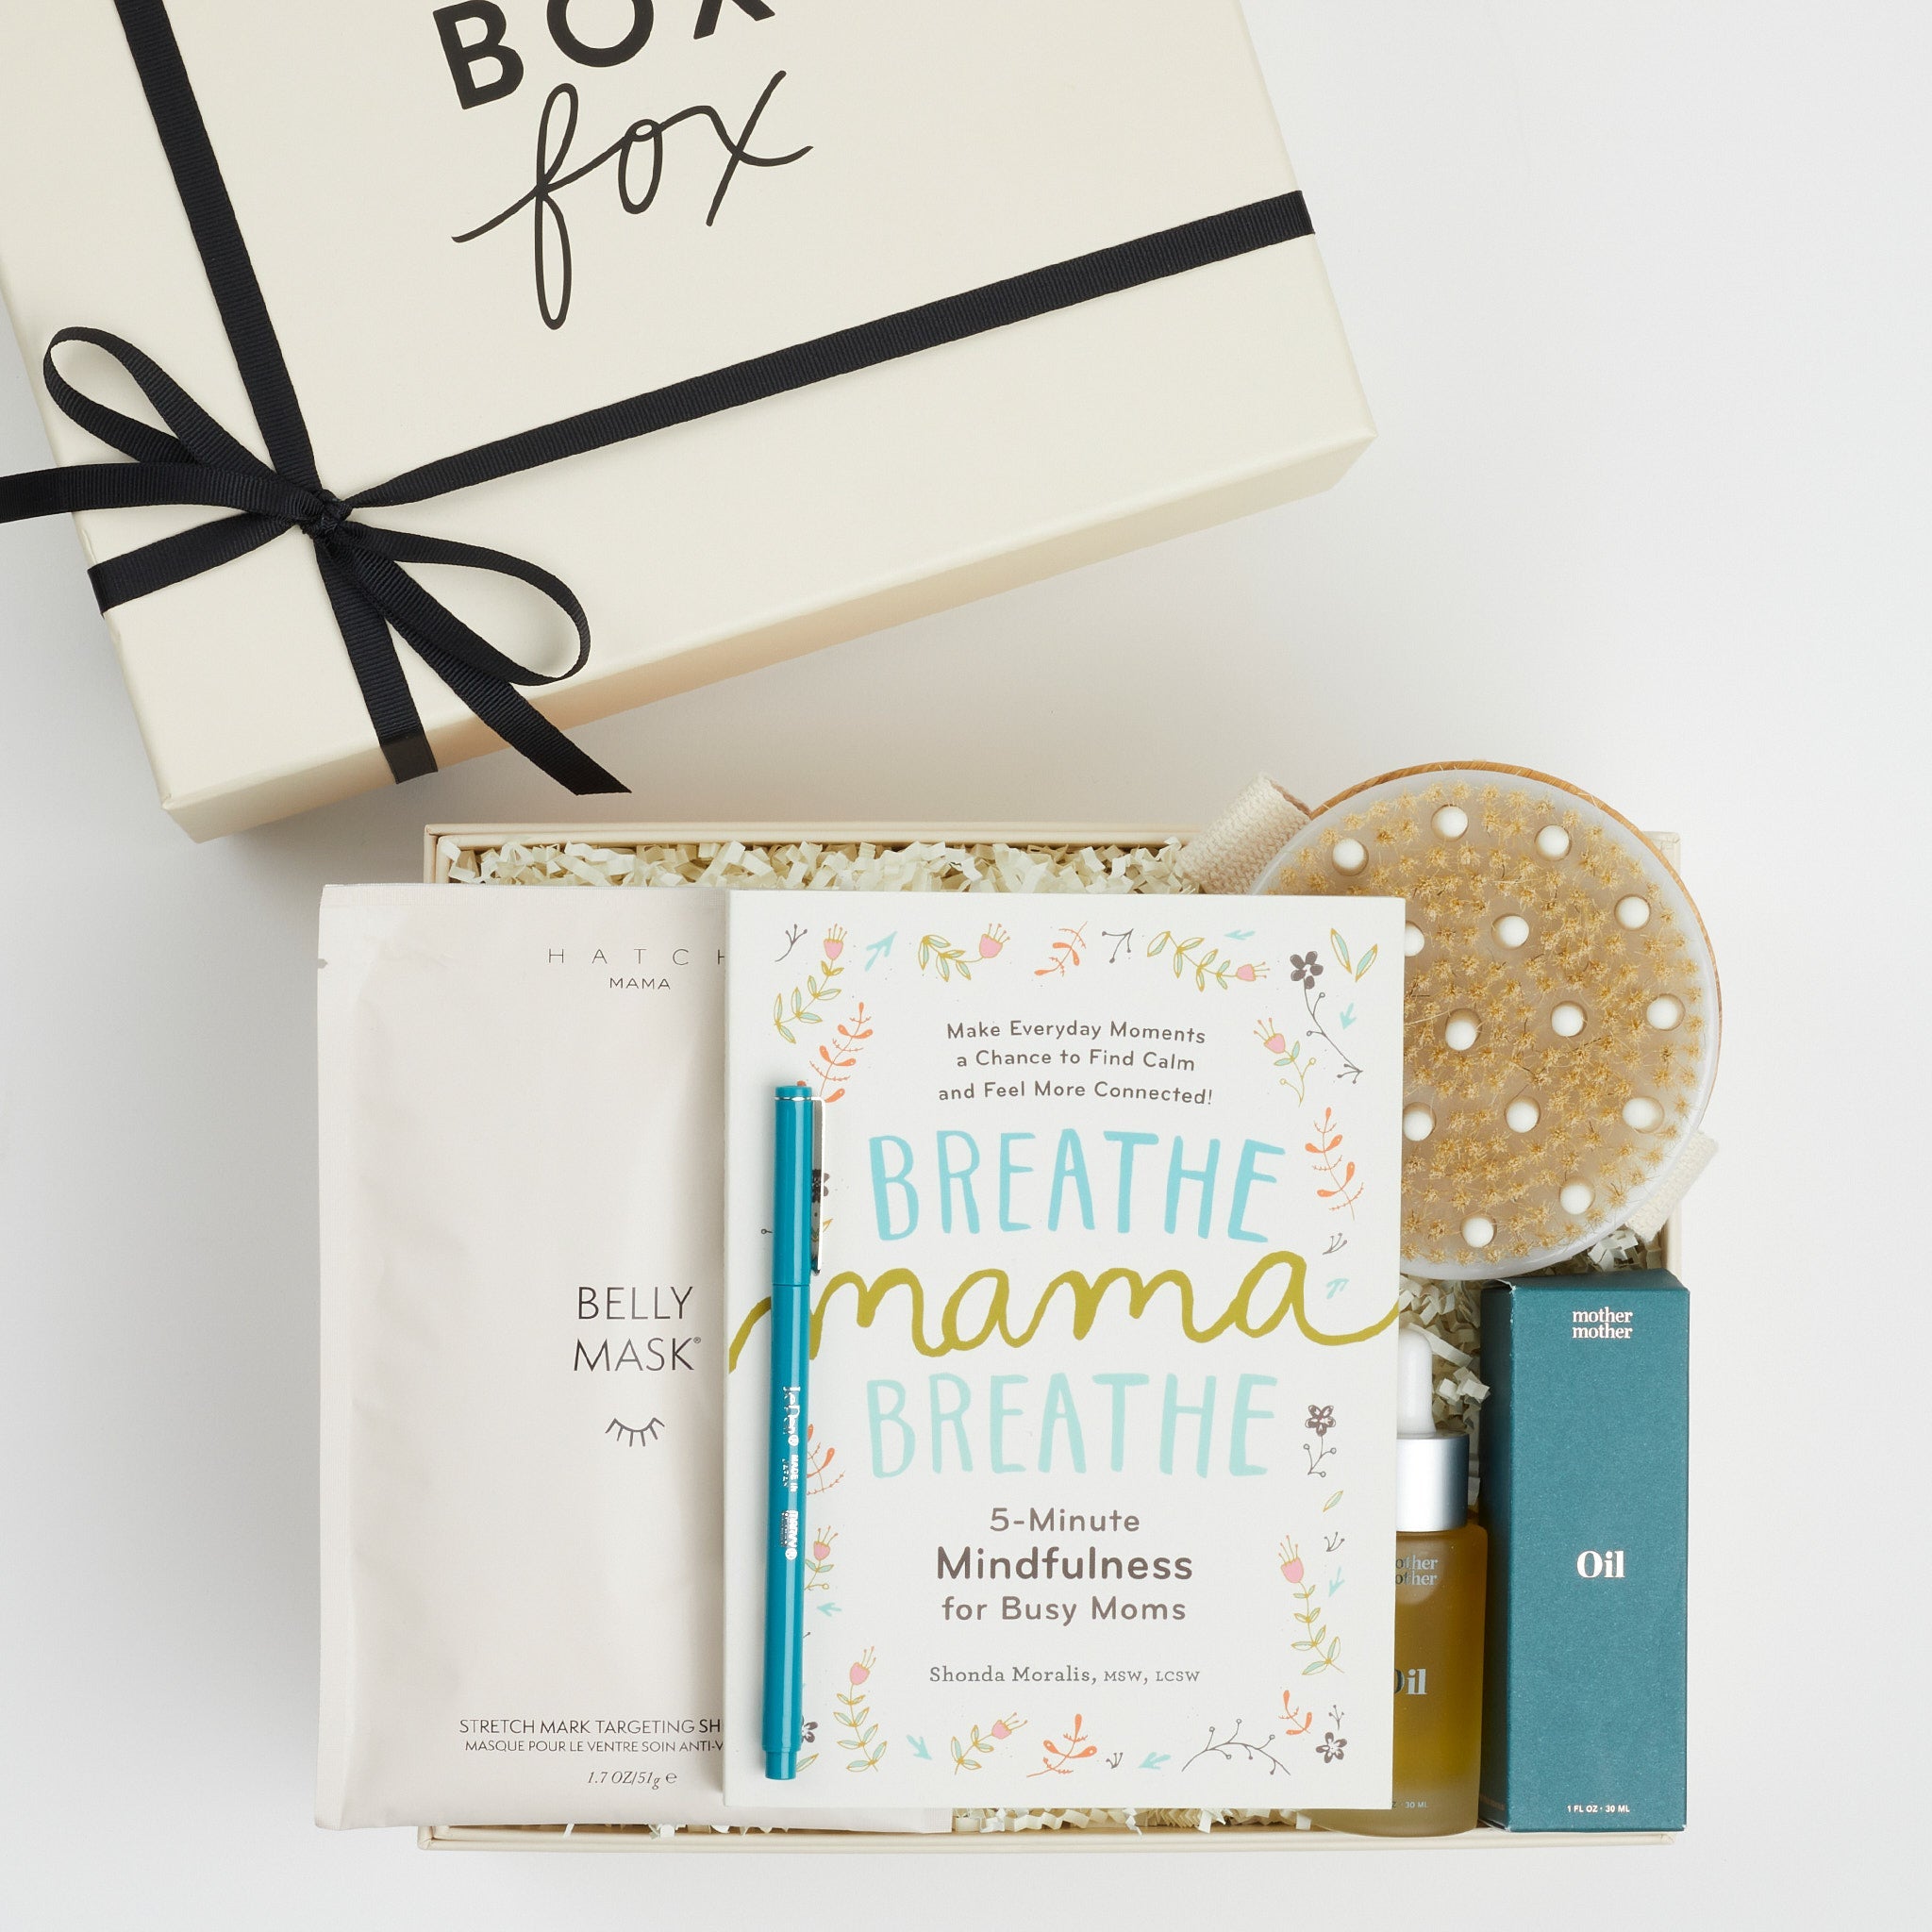 BOXFOX Creme Gift Box filled with "Breathe Mama Breathe" Book, Le Pen Teal Pen, Mother Mother Belly Oil, HATCH Belly Sheet Mask , and BOXFOX Round Dry Brush